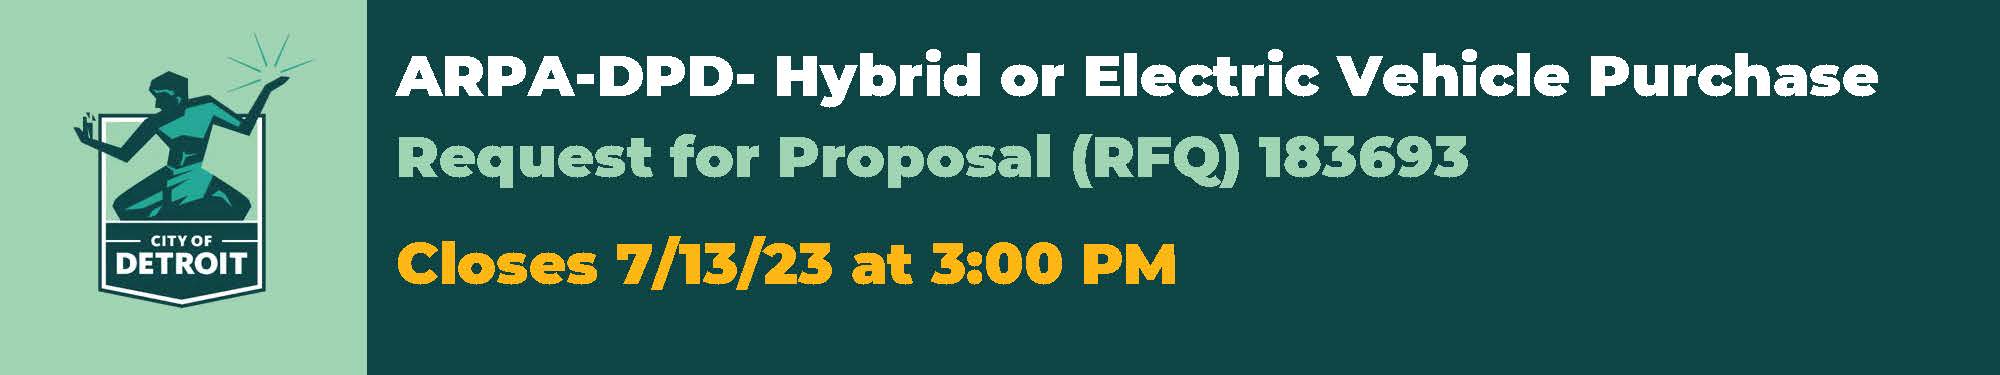 Take Part: ARPA-DPD- Hybrid or Electric Vehicle Purchase